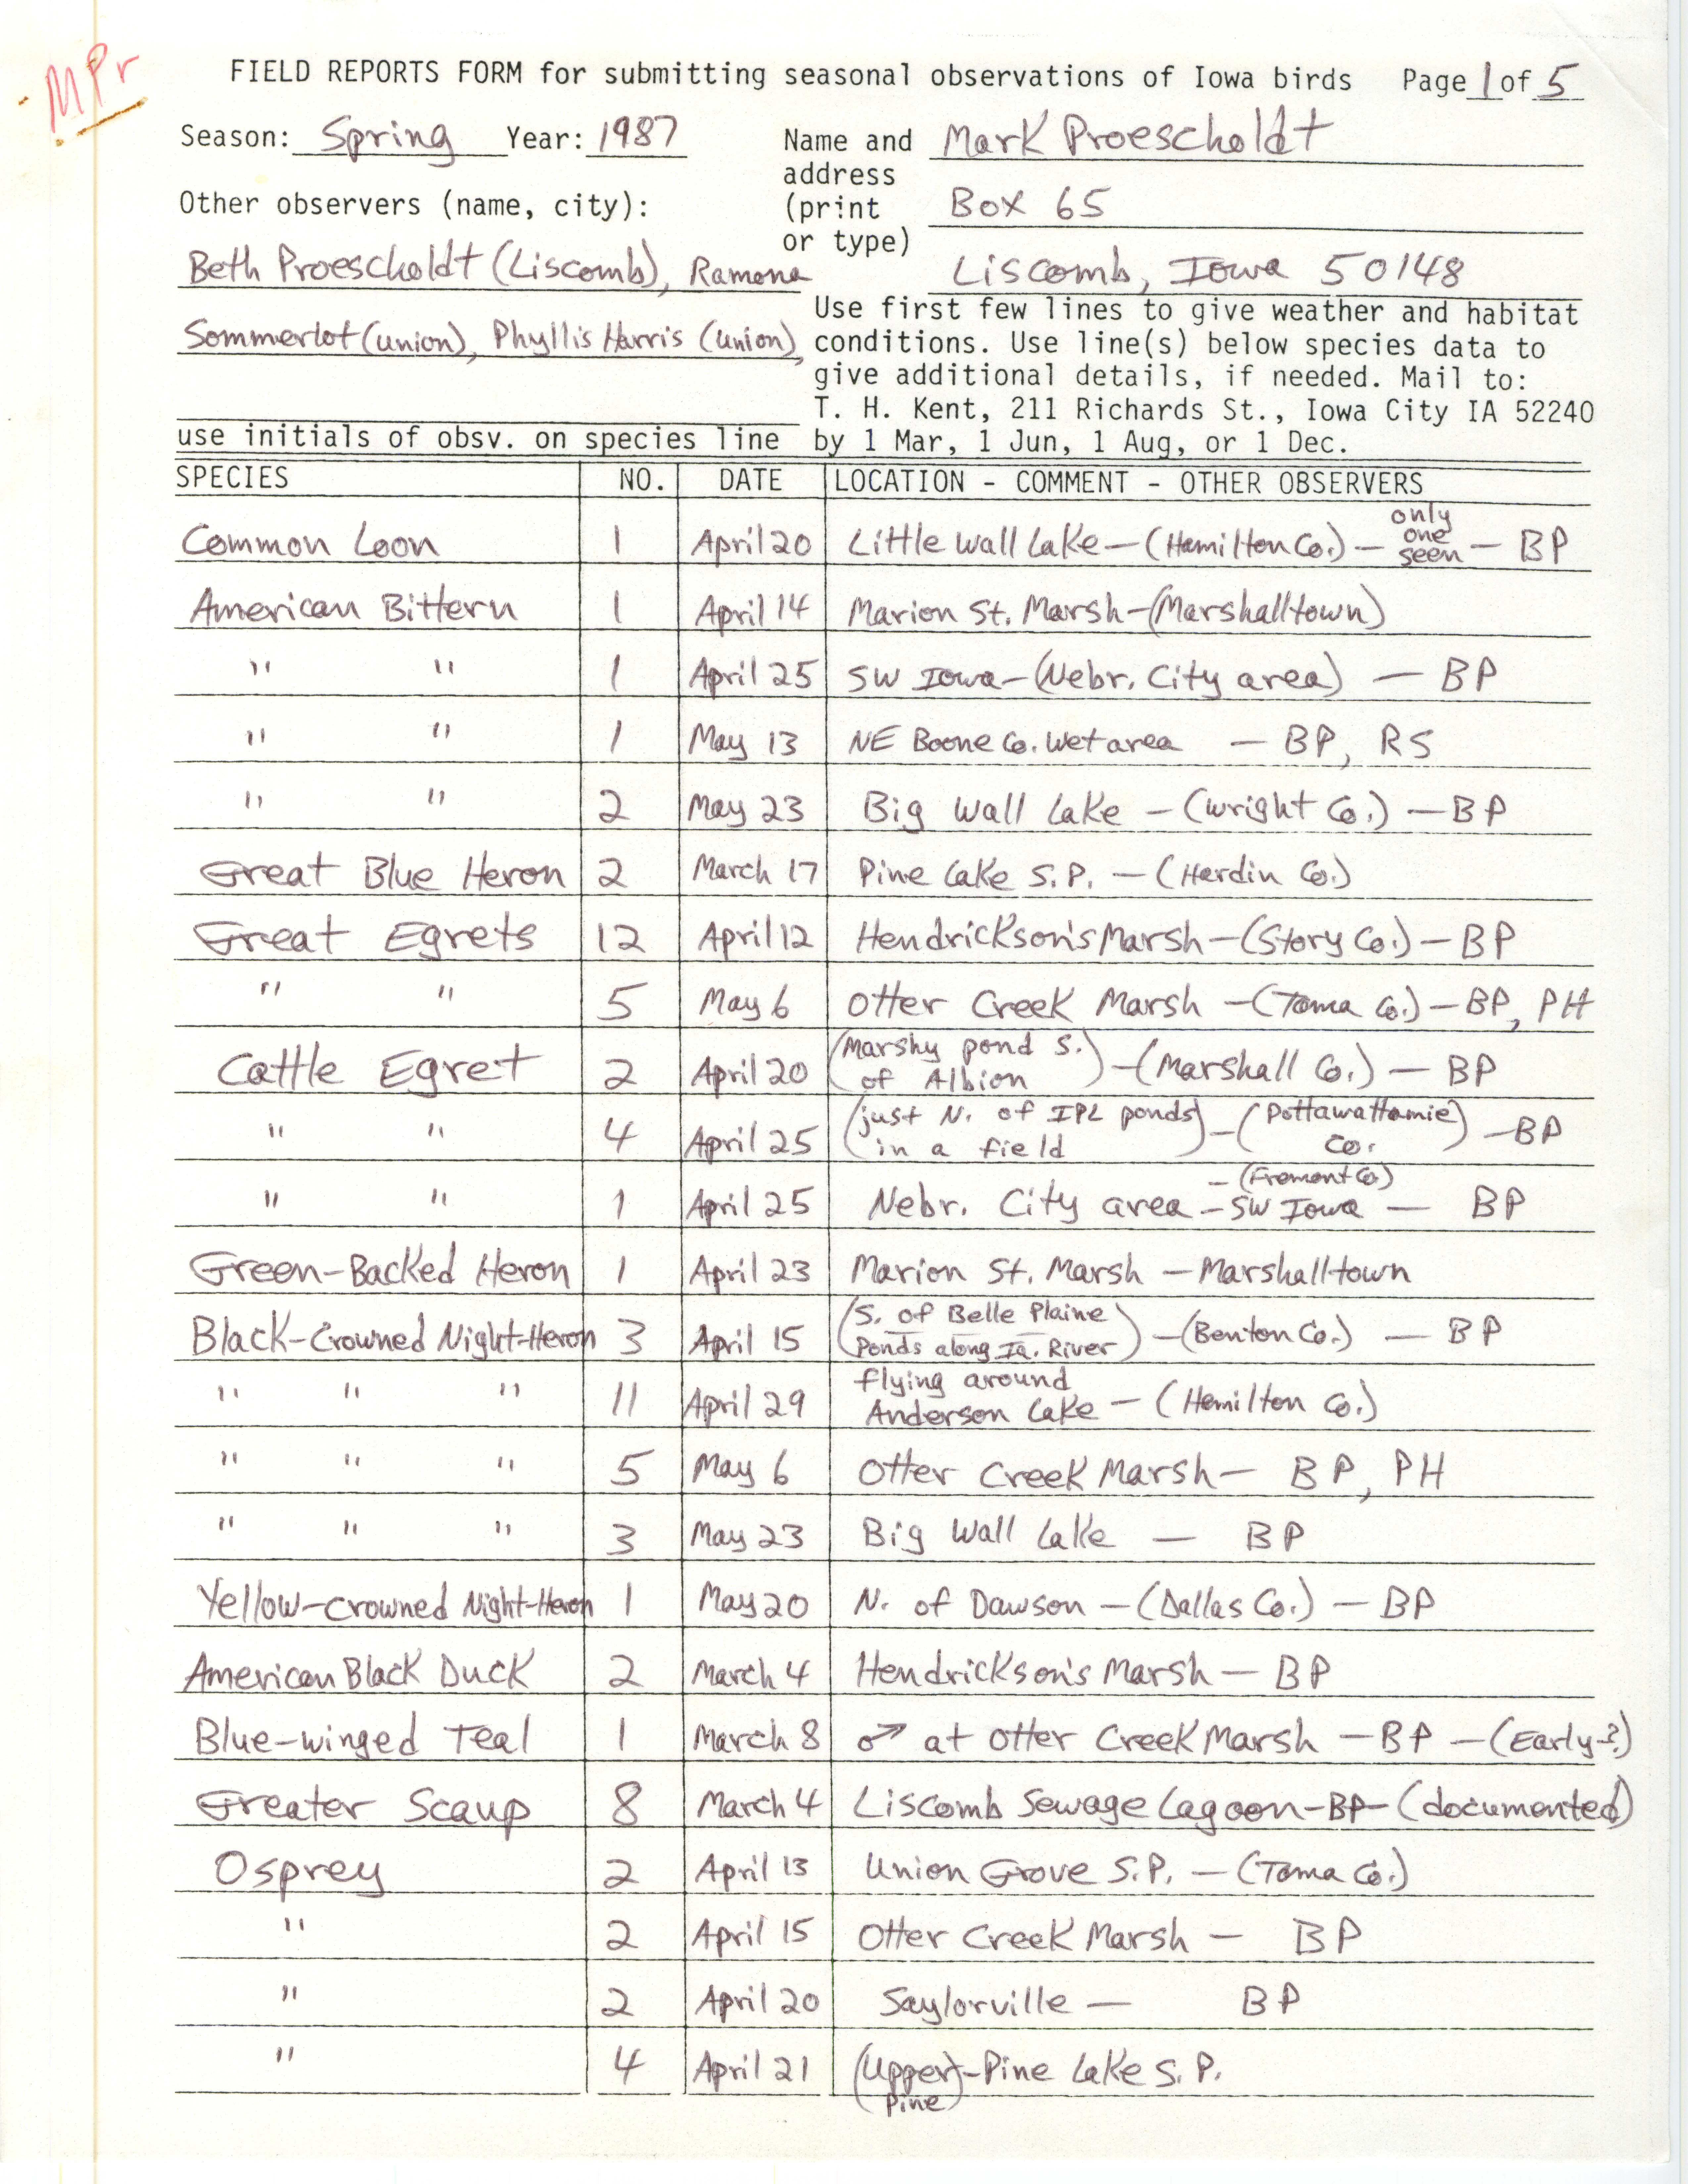 Field reports form for submitting seasonal observations of Iowa birds, Mark Proescholdt, spring 1987